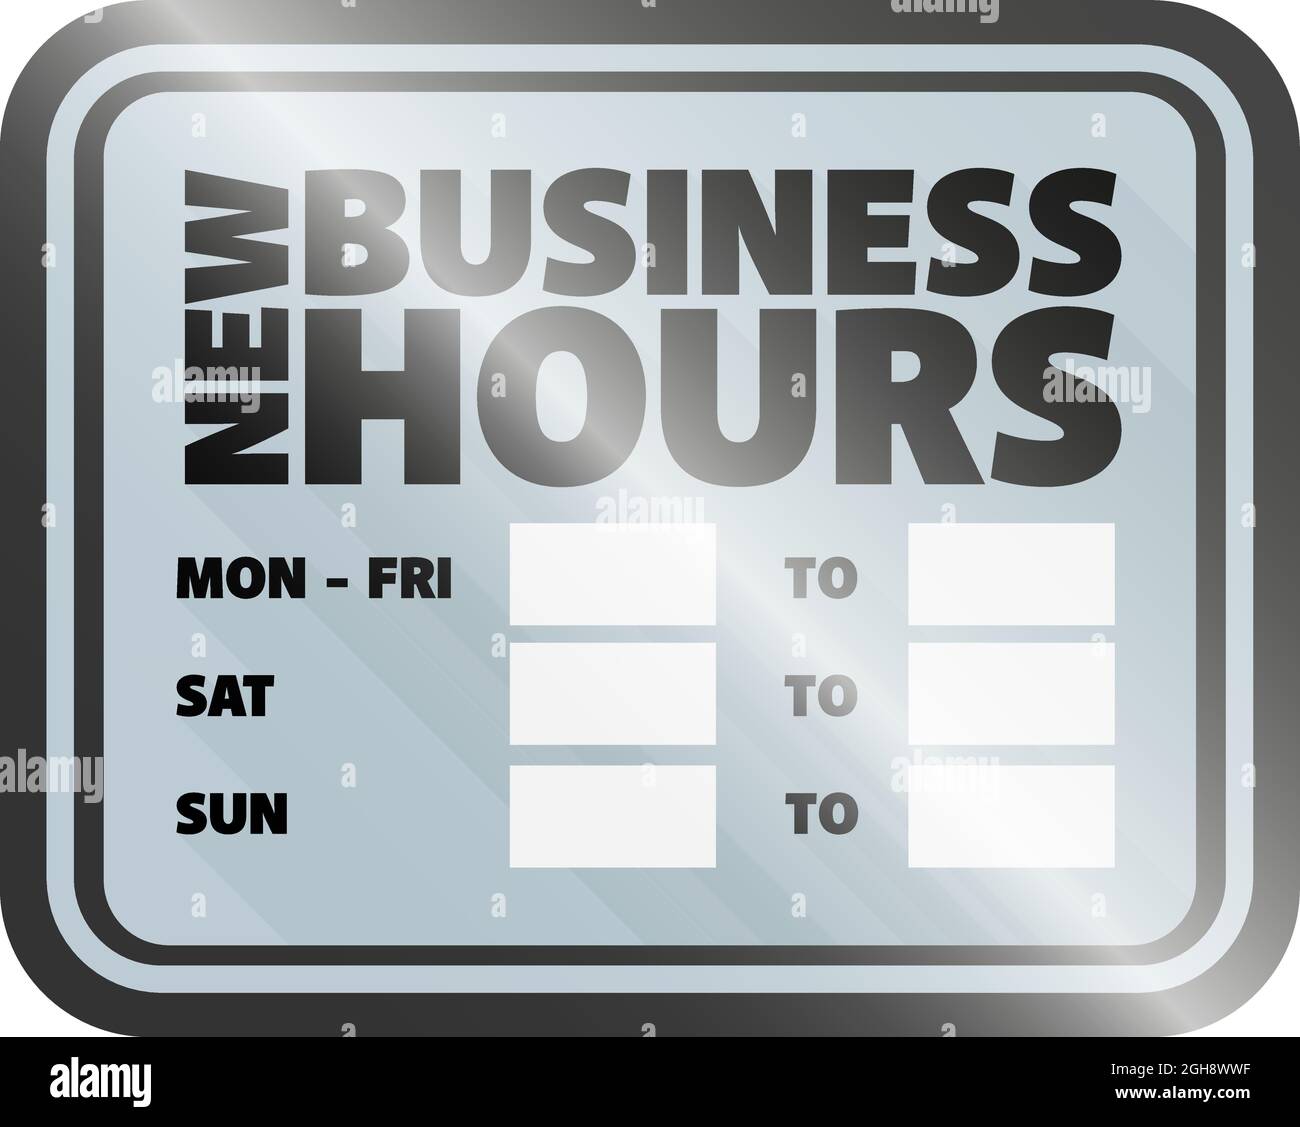 new business hours sign, obening hours sign isolated on white background, vector illustration Stock Vector